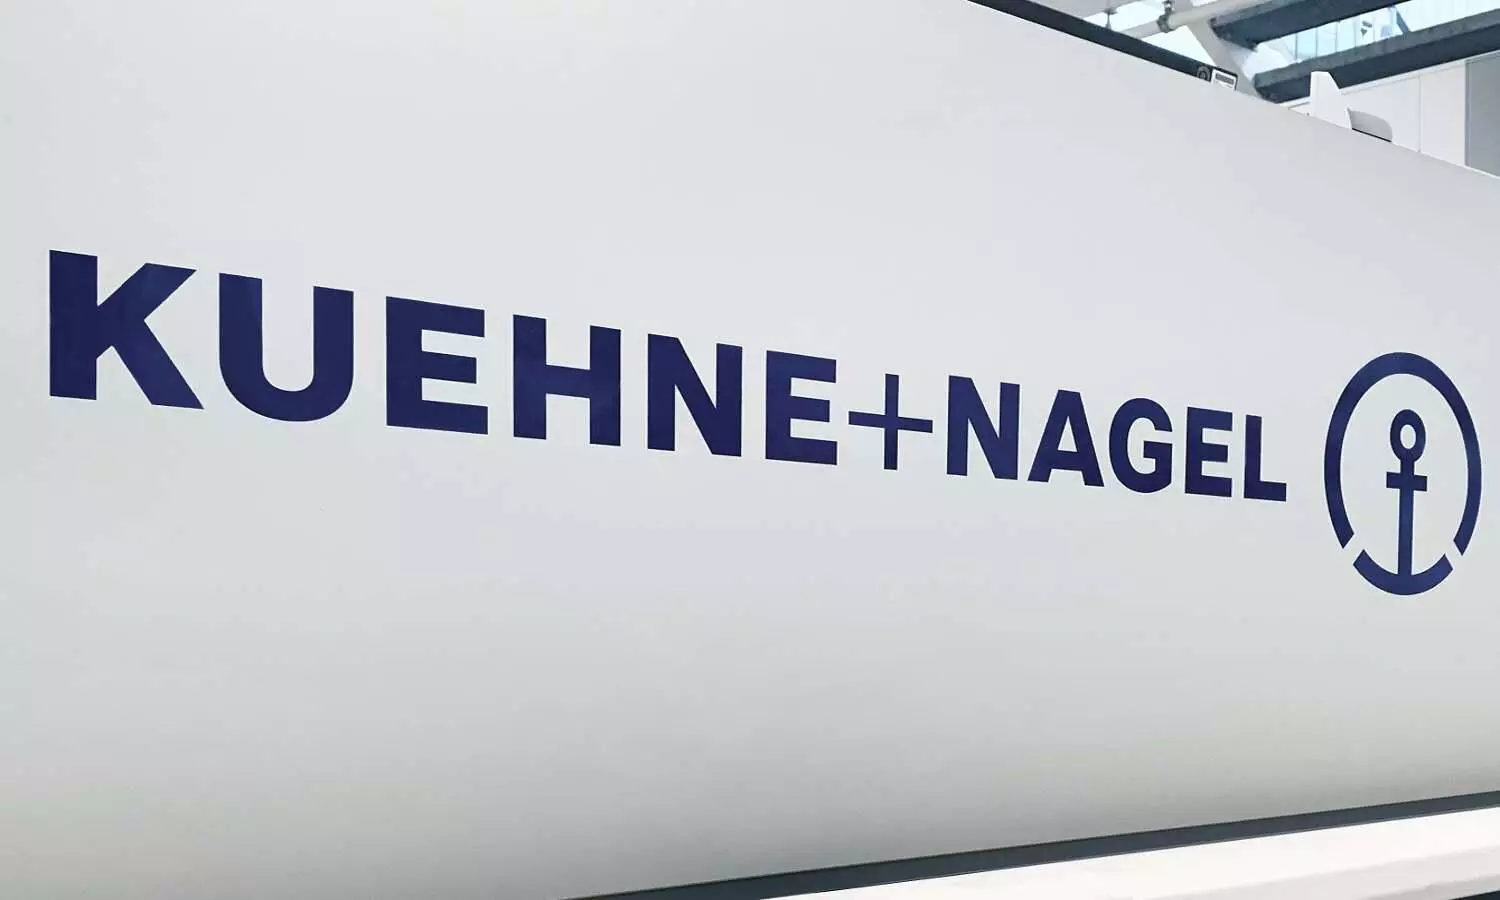 Kuehne+Nagel expands healthcare footprint in North America